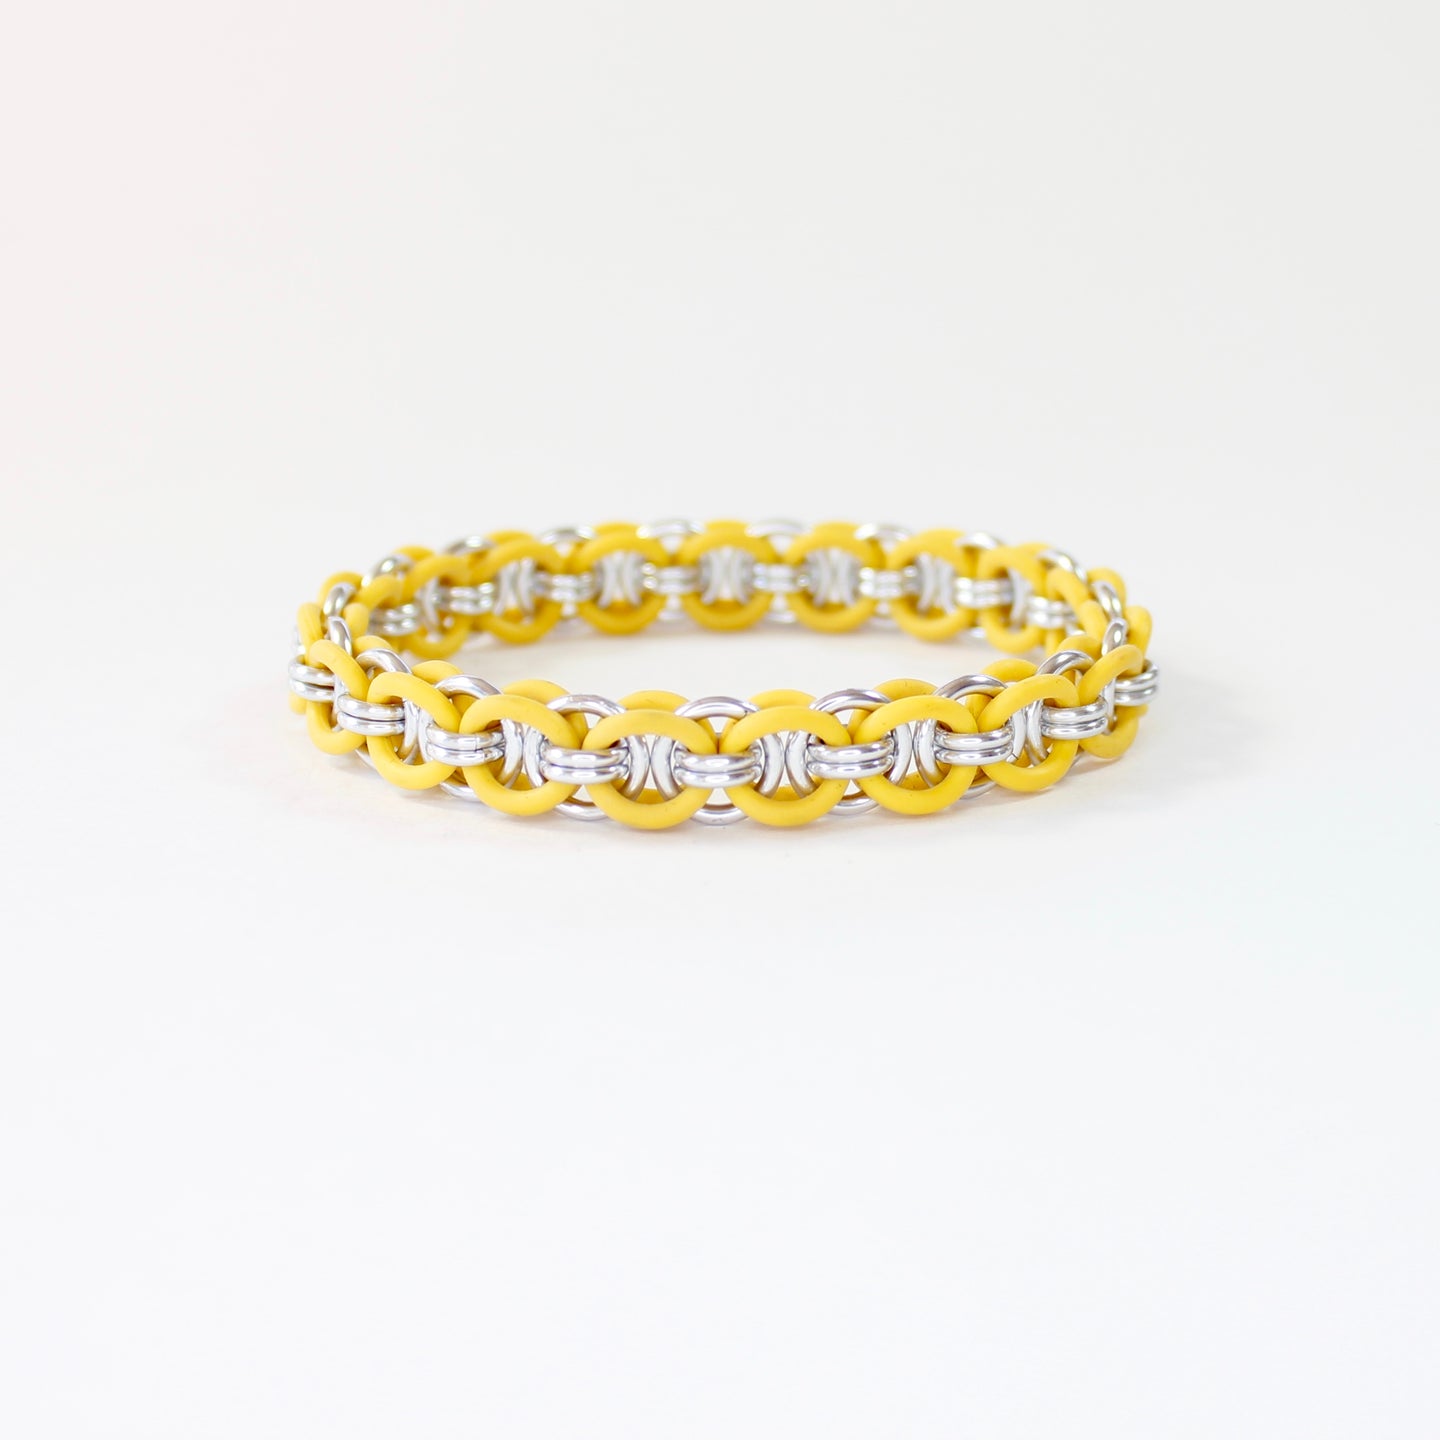 The Helm Stretch Bracelet in Yellow + Silver